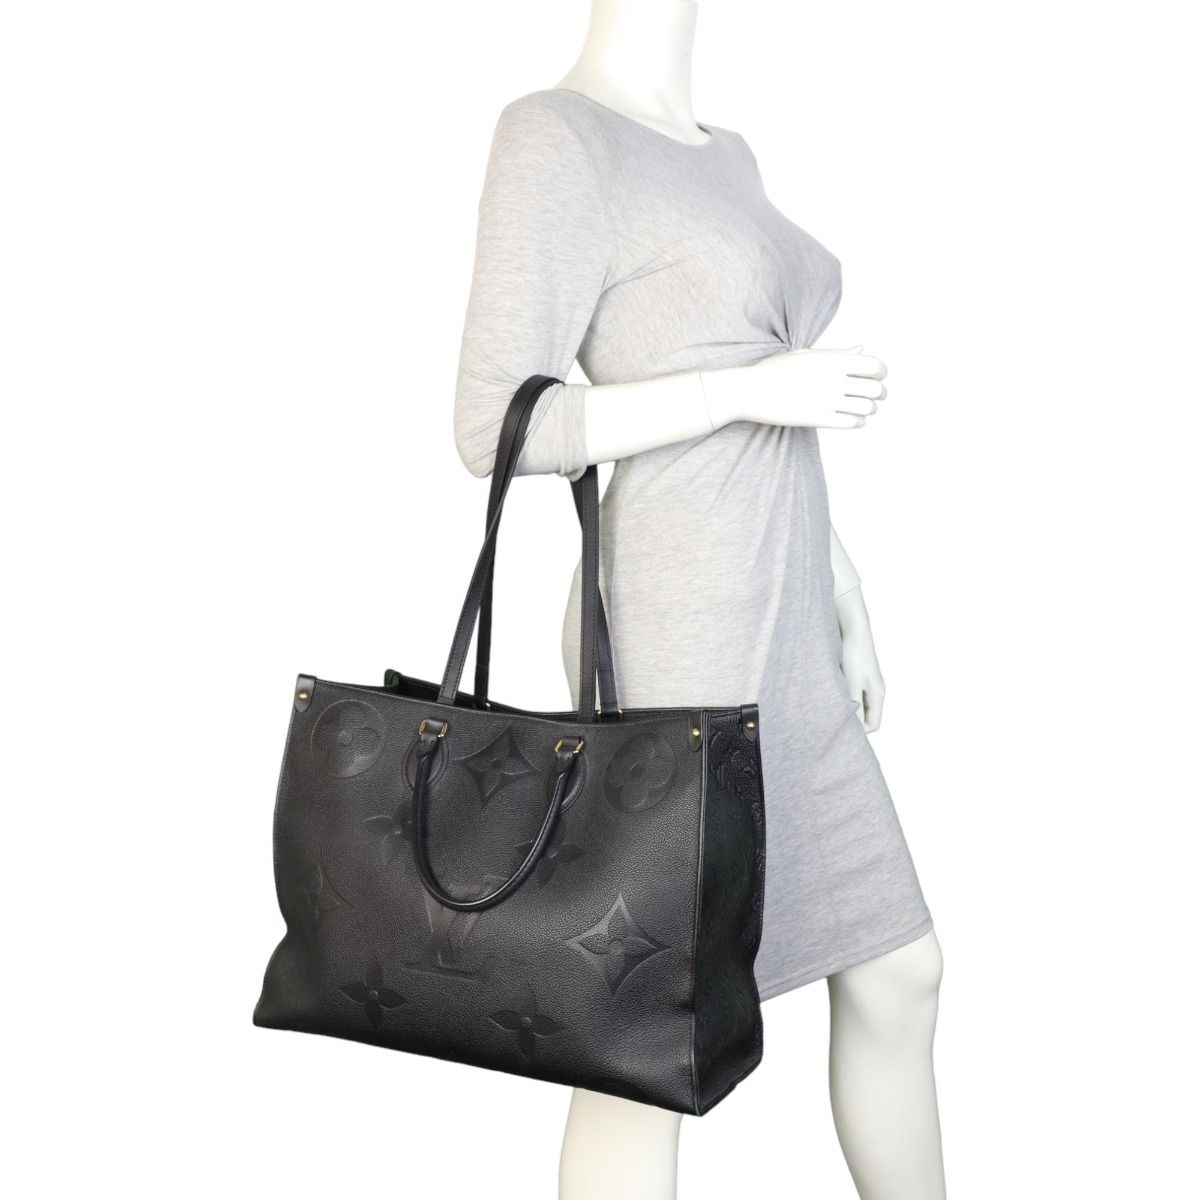 onthego gm tote bag louis vuittons